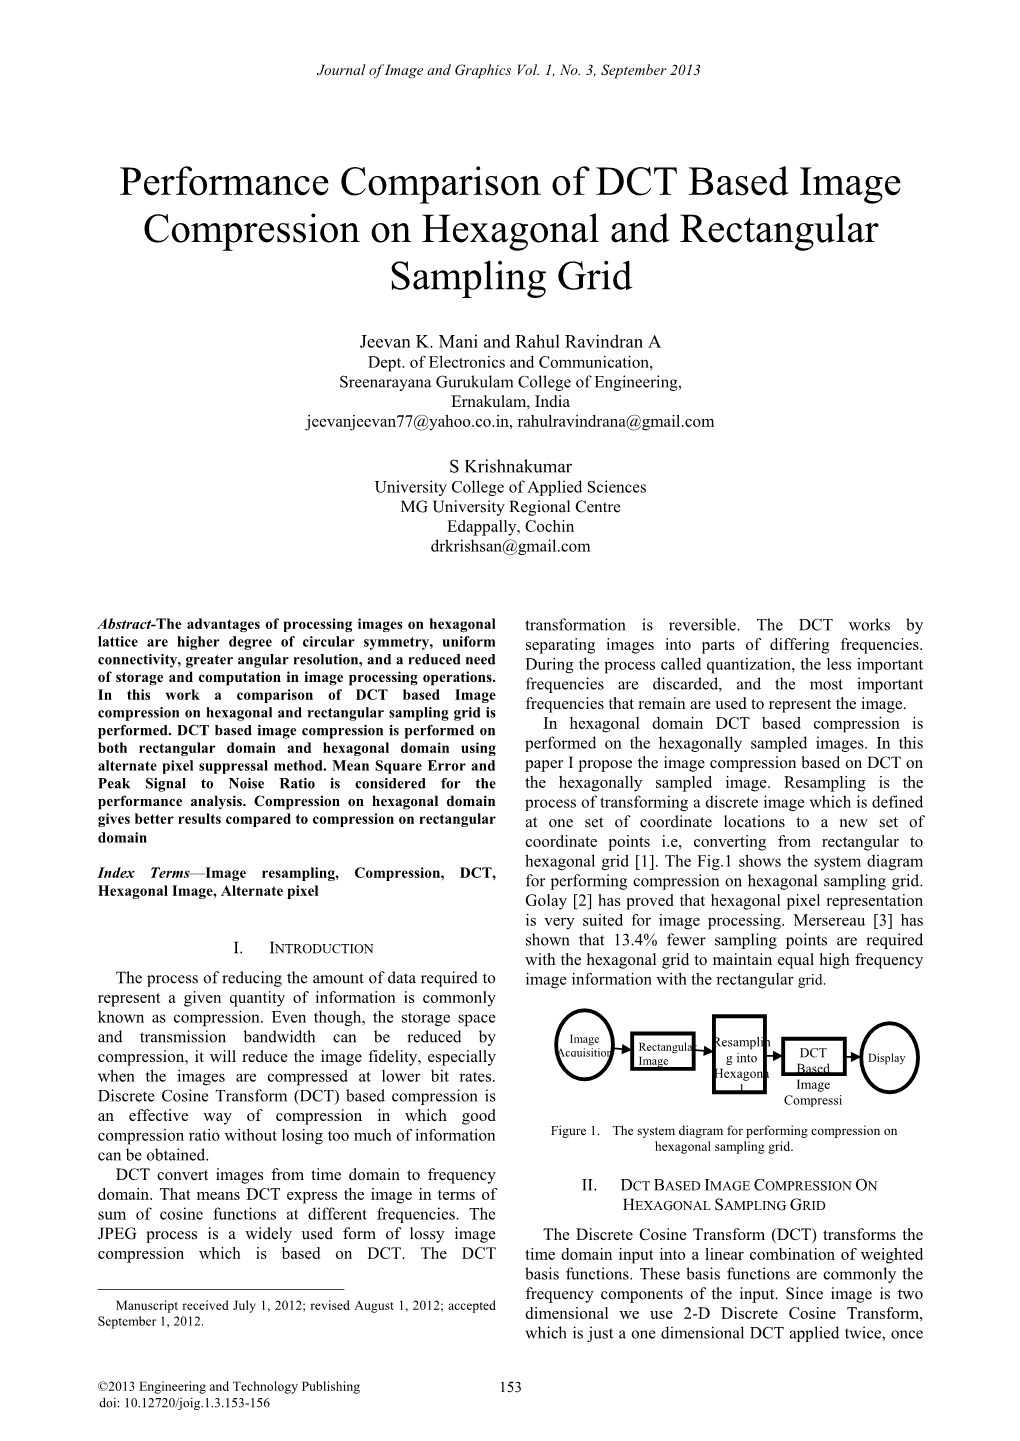 Performance Comparison of DCT Based Image Compression on Hexagonal and Rectangular Sampling Grid